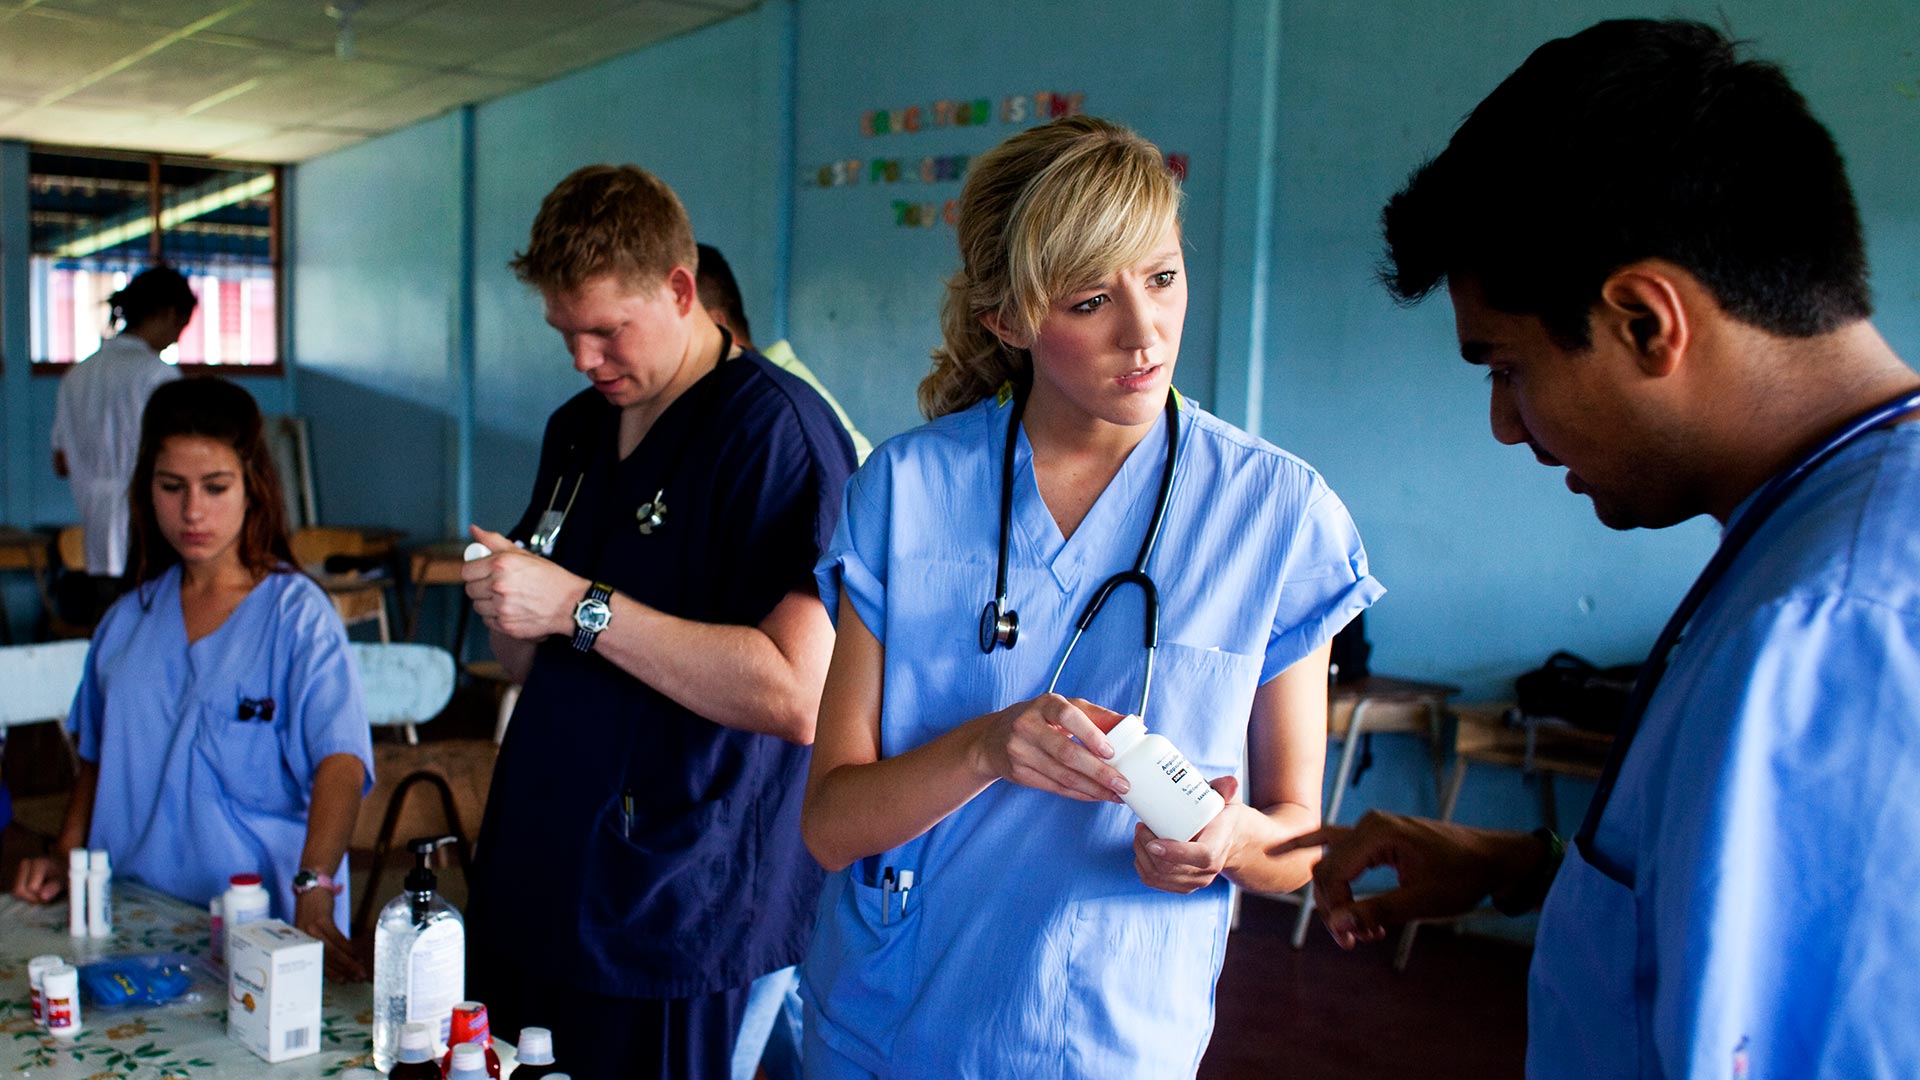 Students with stethoscopes discuss and examine bottles of medication